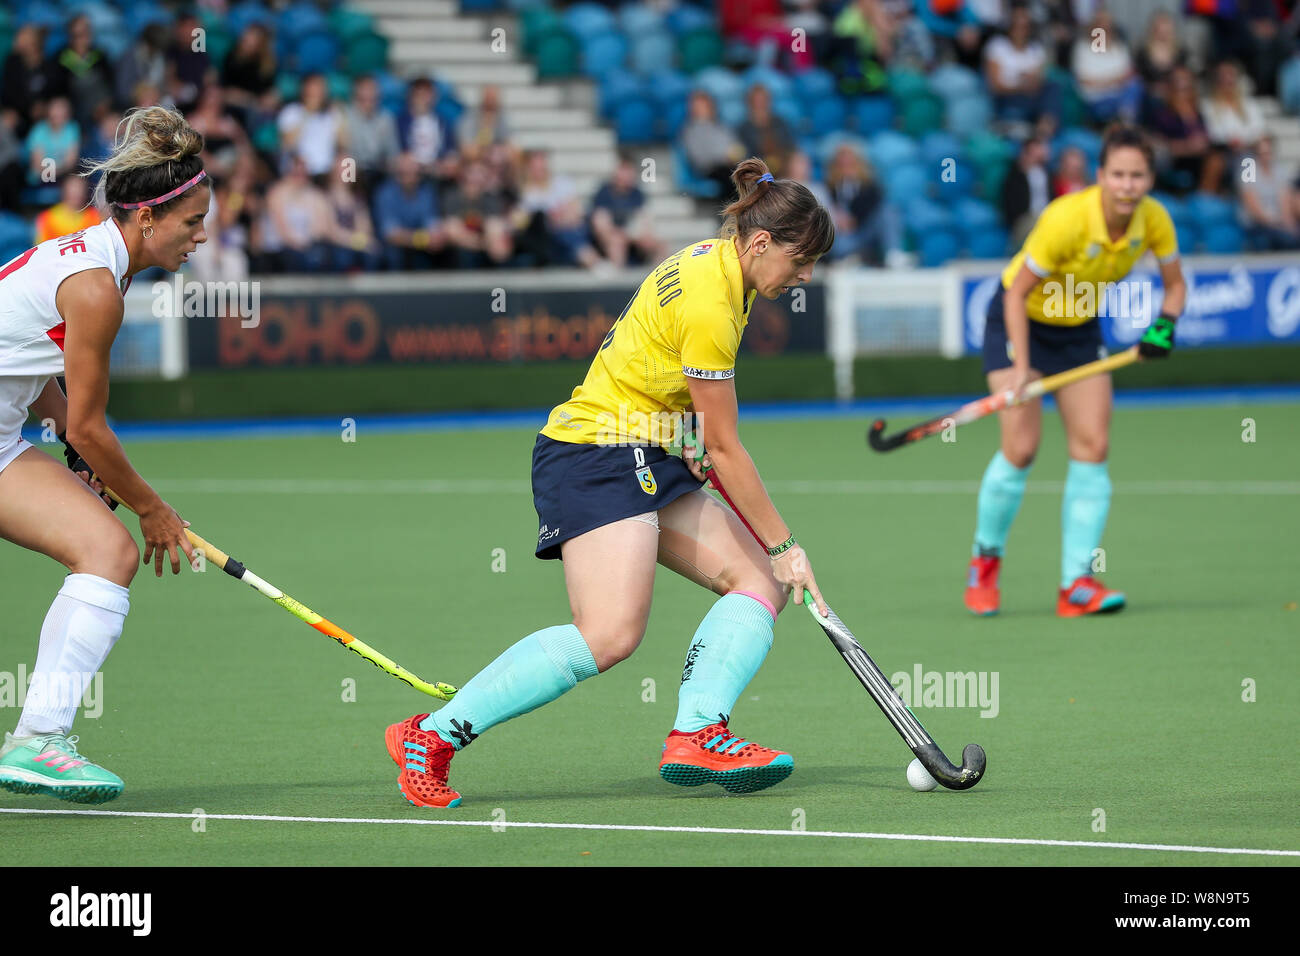 Glasgow, Scotland, UK. 10th Aug 2019. The final day of the Women's Eurohockey Championship ll held at Glasgow National Hockey Centre was a sell-out with thousands of spectators filling the stands and open areas surrounding the pitch to watch highly competitive matches between teams across Europe. Pics of Turkey (white) vs Ukraine (yellow) when Ukraine won 5 - 2 Credit: Findlay/Alamy Live News Stock Photo